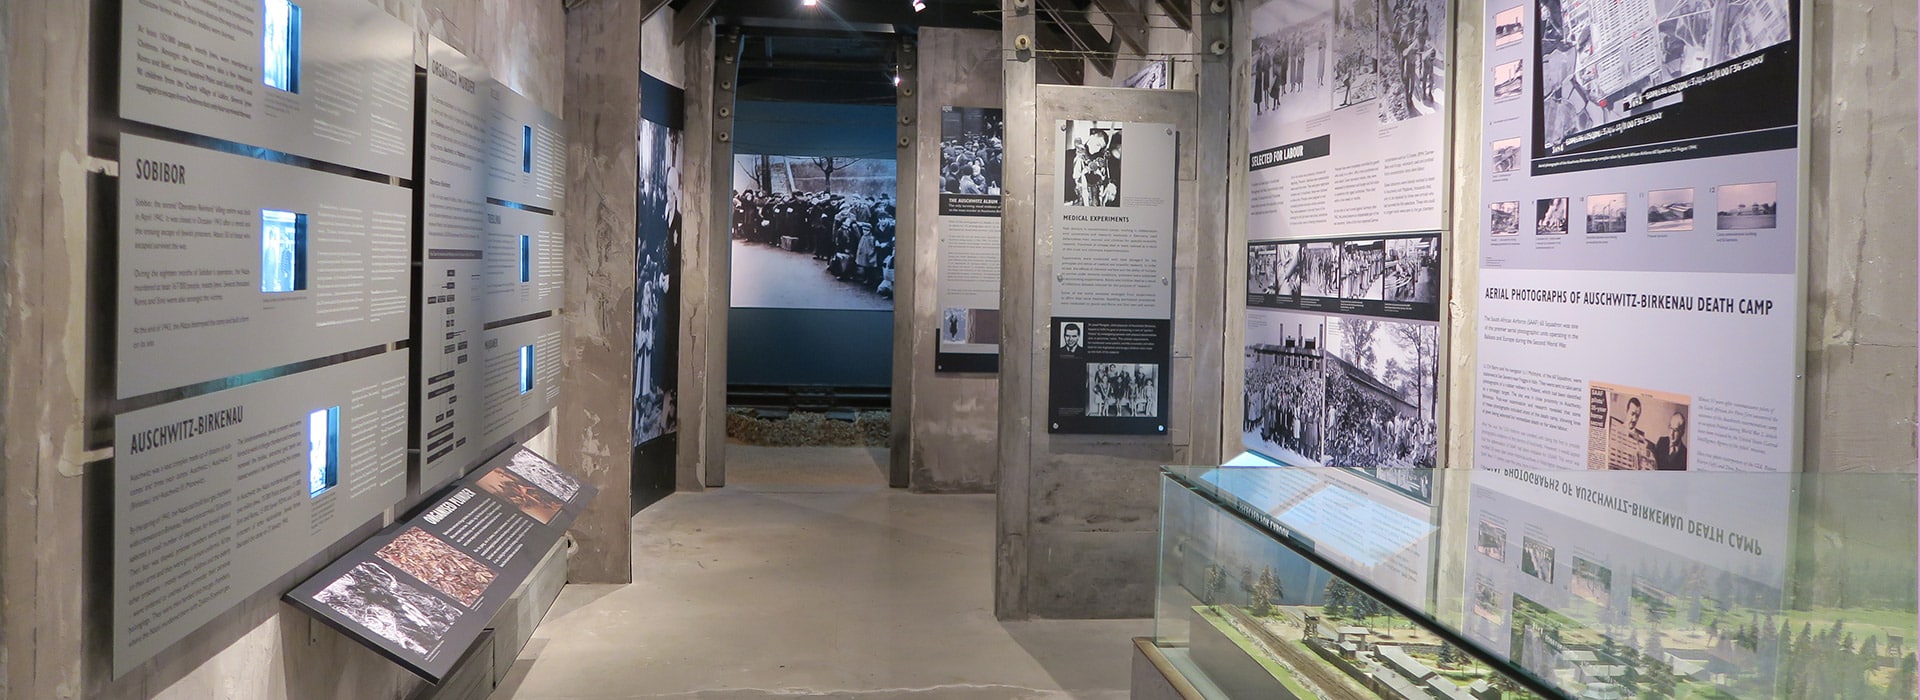 Visit - Cape Town Holocaust and Genocide Centre